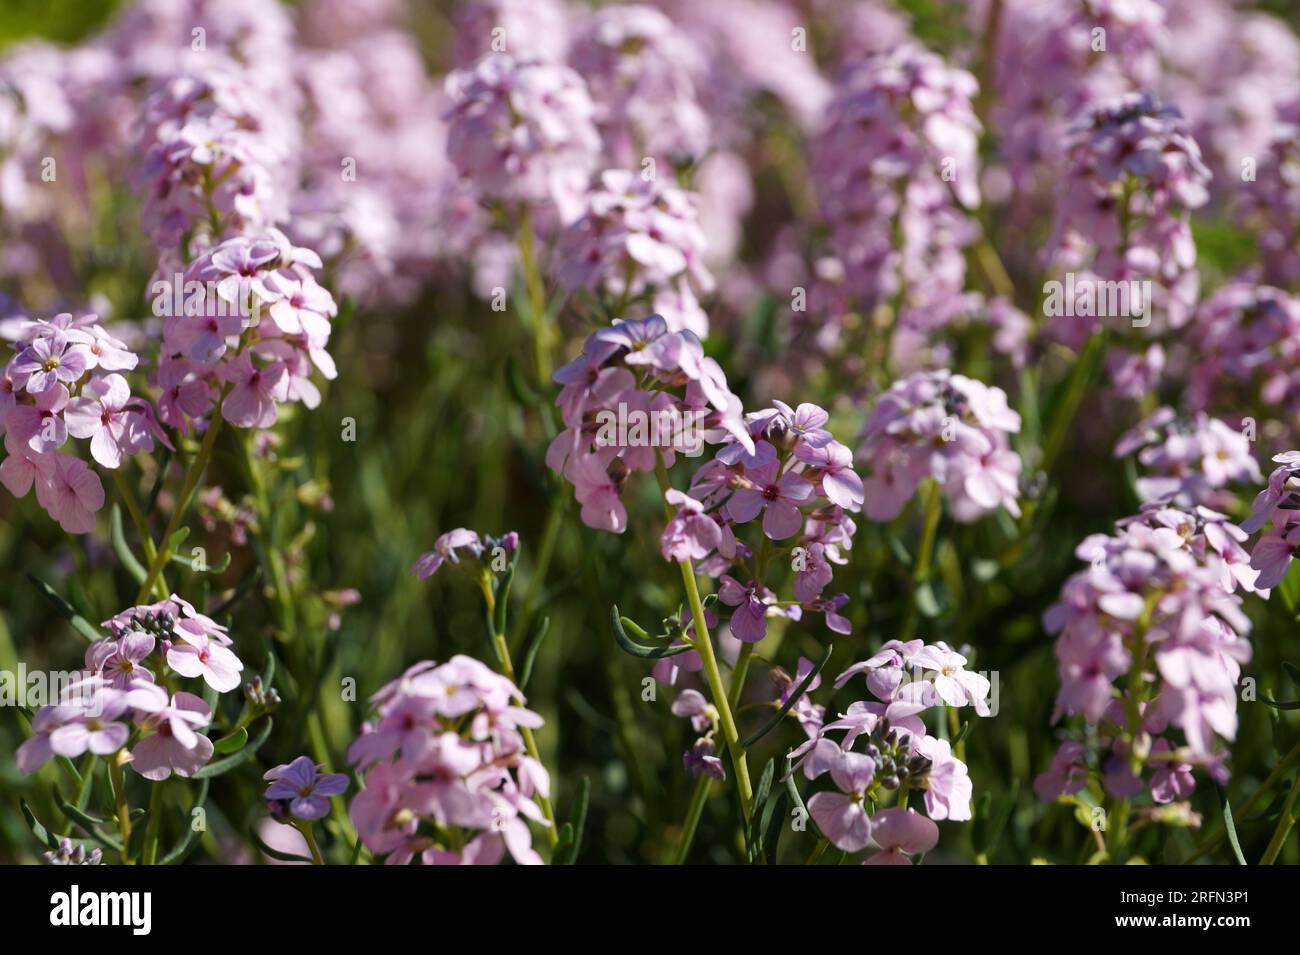 Aethionema grandiflorum close-up for floral background Stock Photo